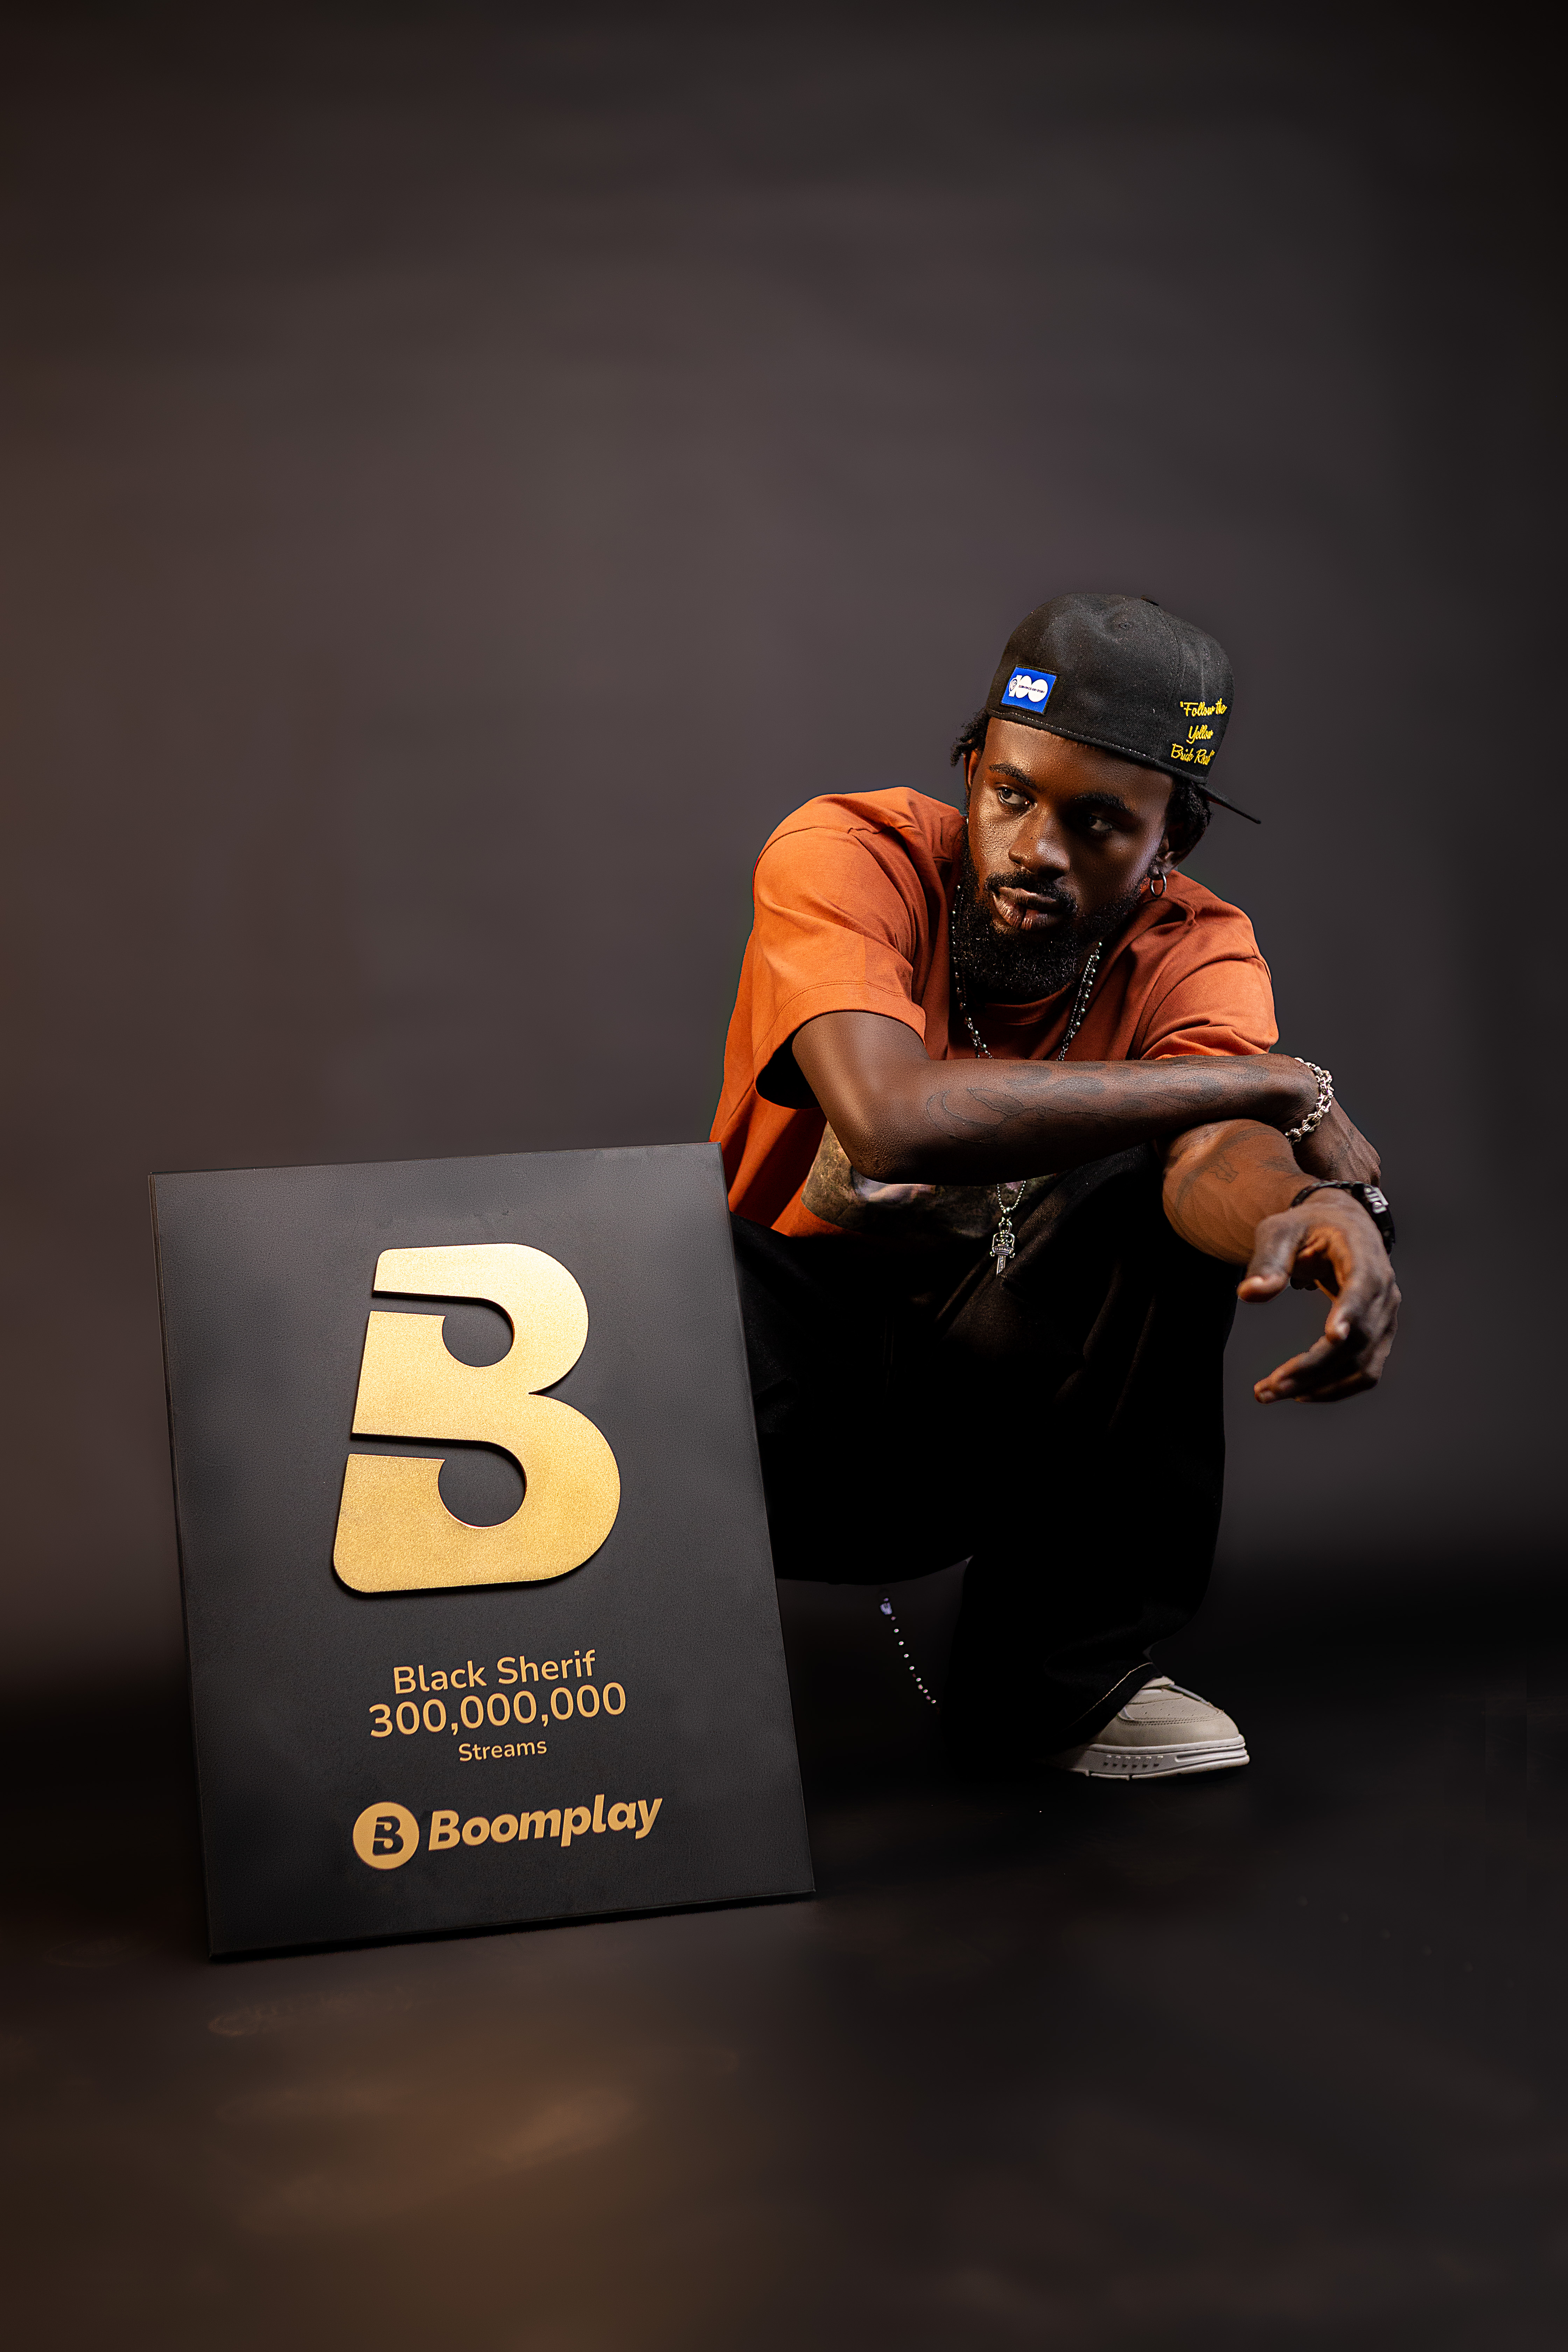 Black Sherif Receives Boomplay Plaque for 300M+ Streams Milestone